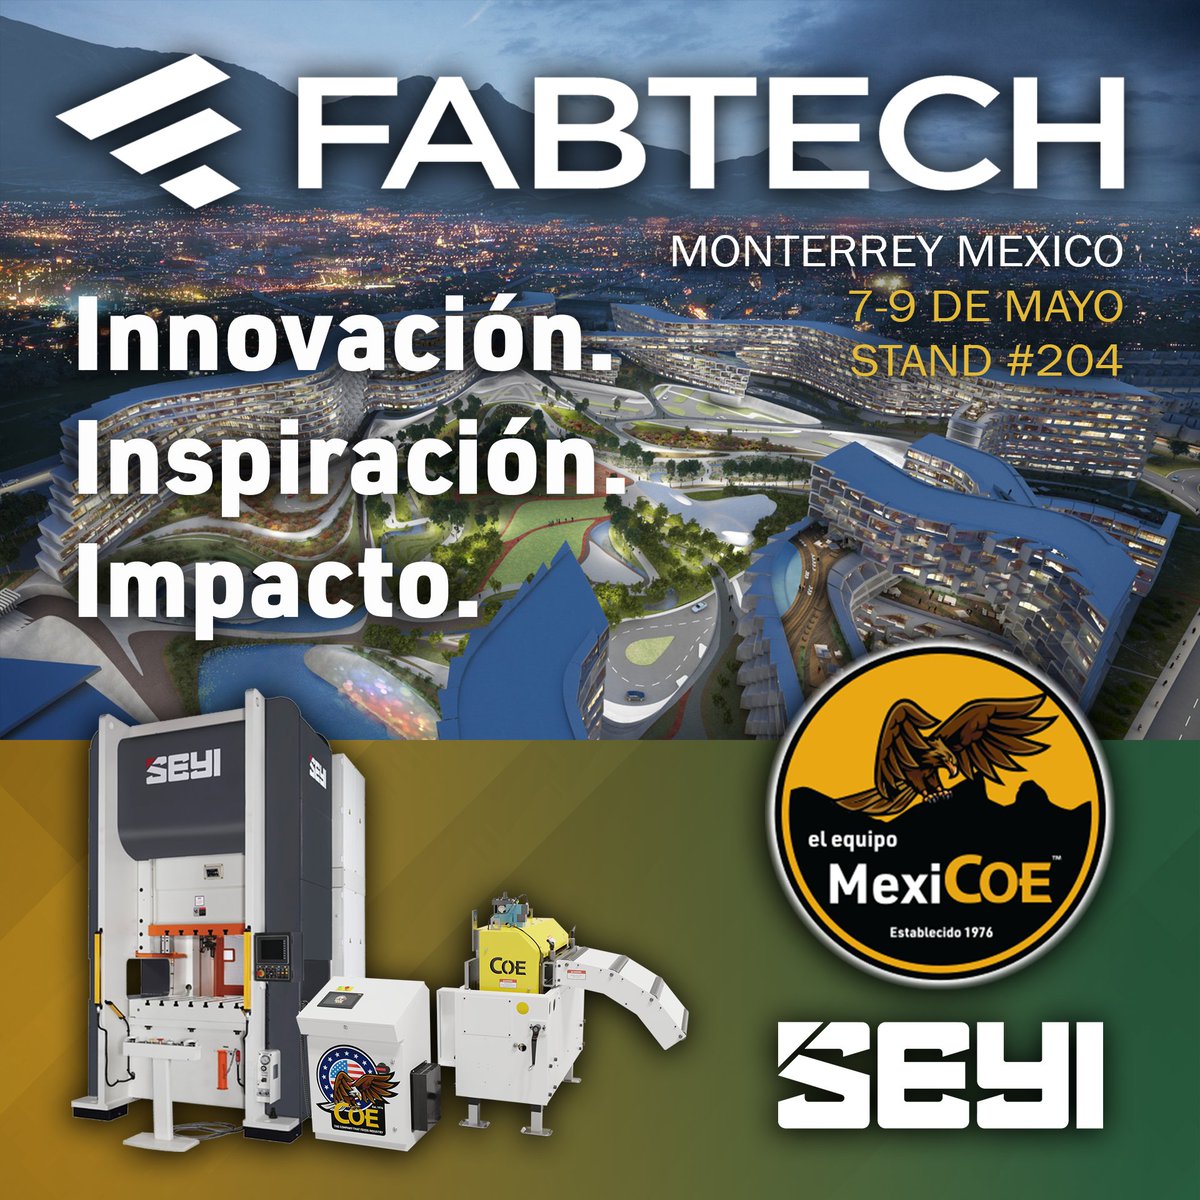 Visit our booth #204 at FABTECH Mexico from May 7th to 9th, 2024. COE and SEYI are joining forces in Monterrey to showcase innovation in stamping processes. @SEYI_Presses

#FABTECHMexico #Innovation #Stamping